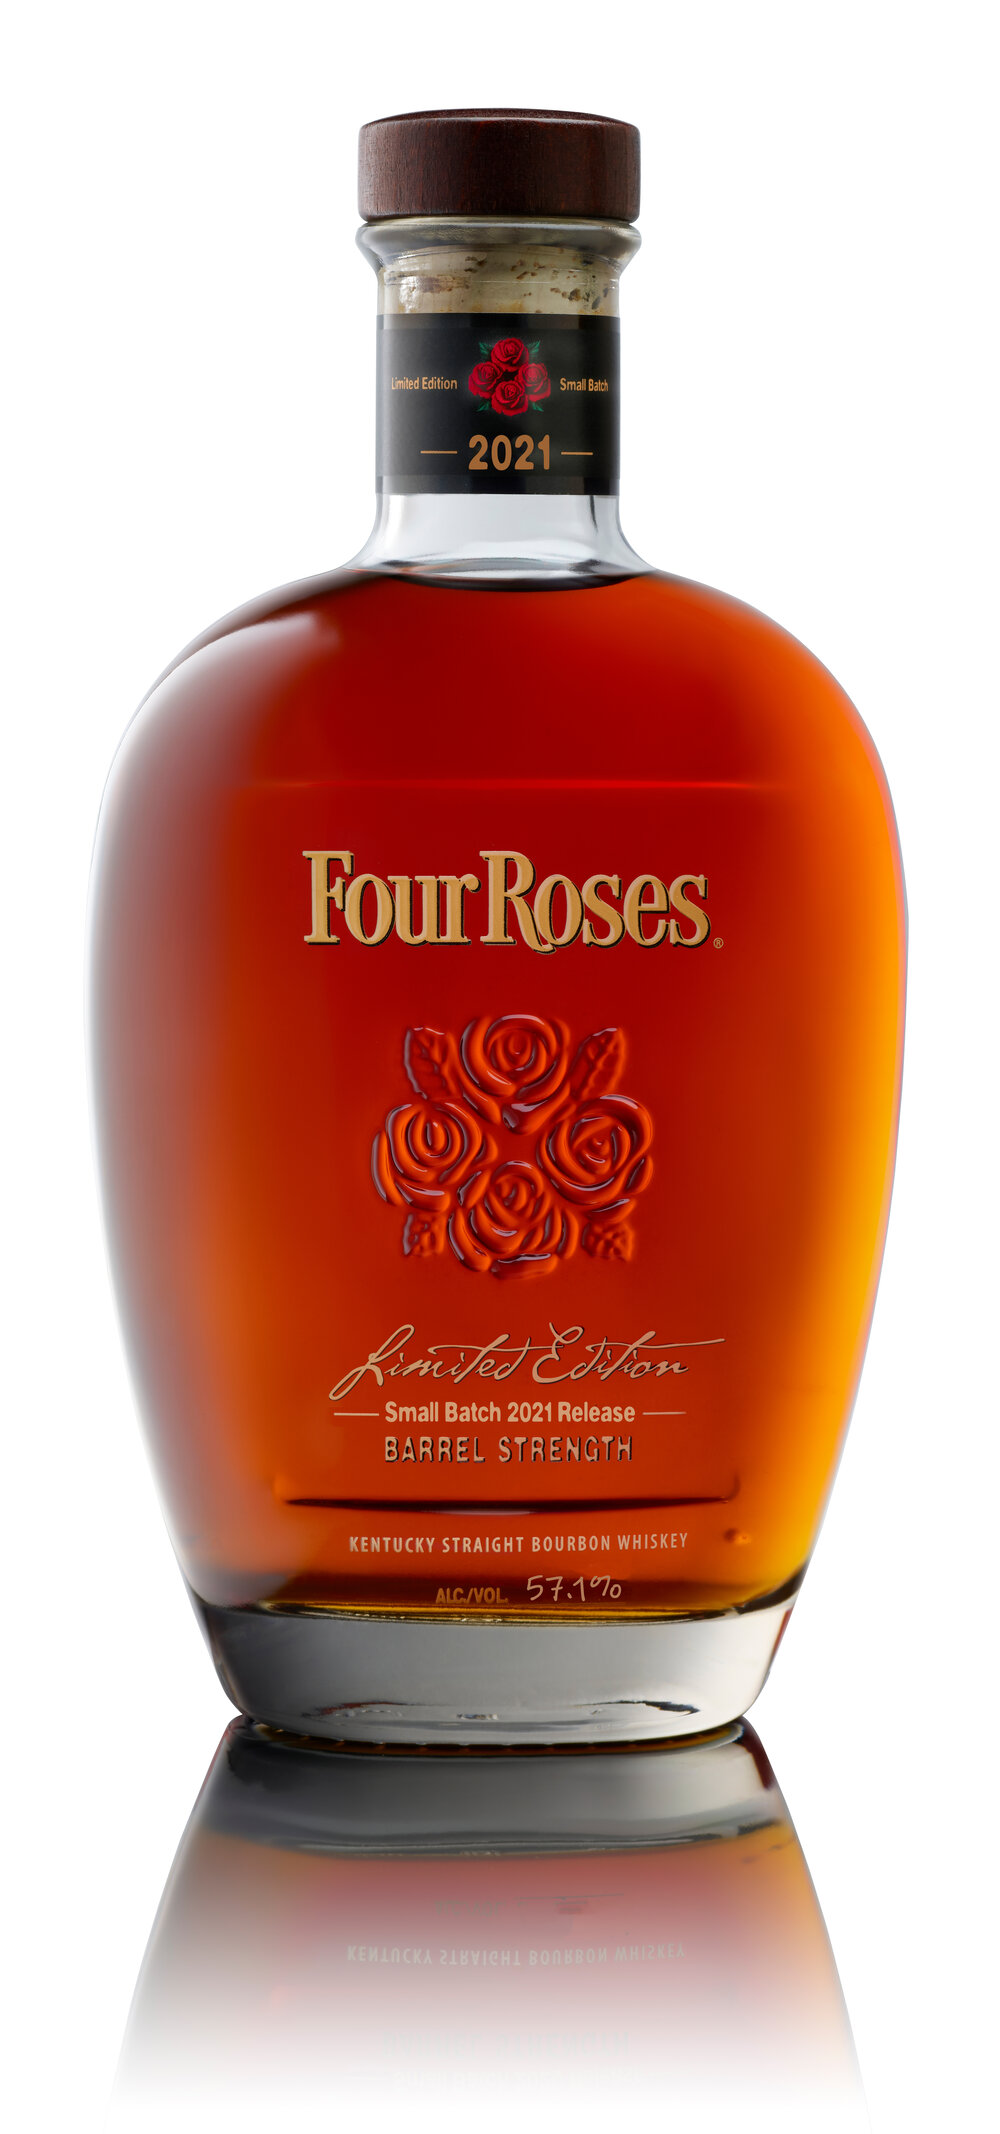 IMAGE: A bottle of Four Roses Limited Edition Small Batch 2021